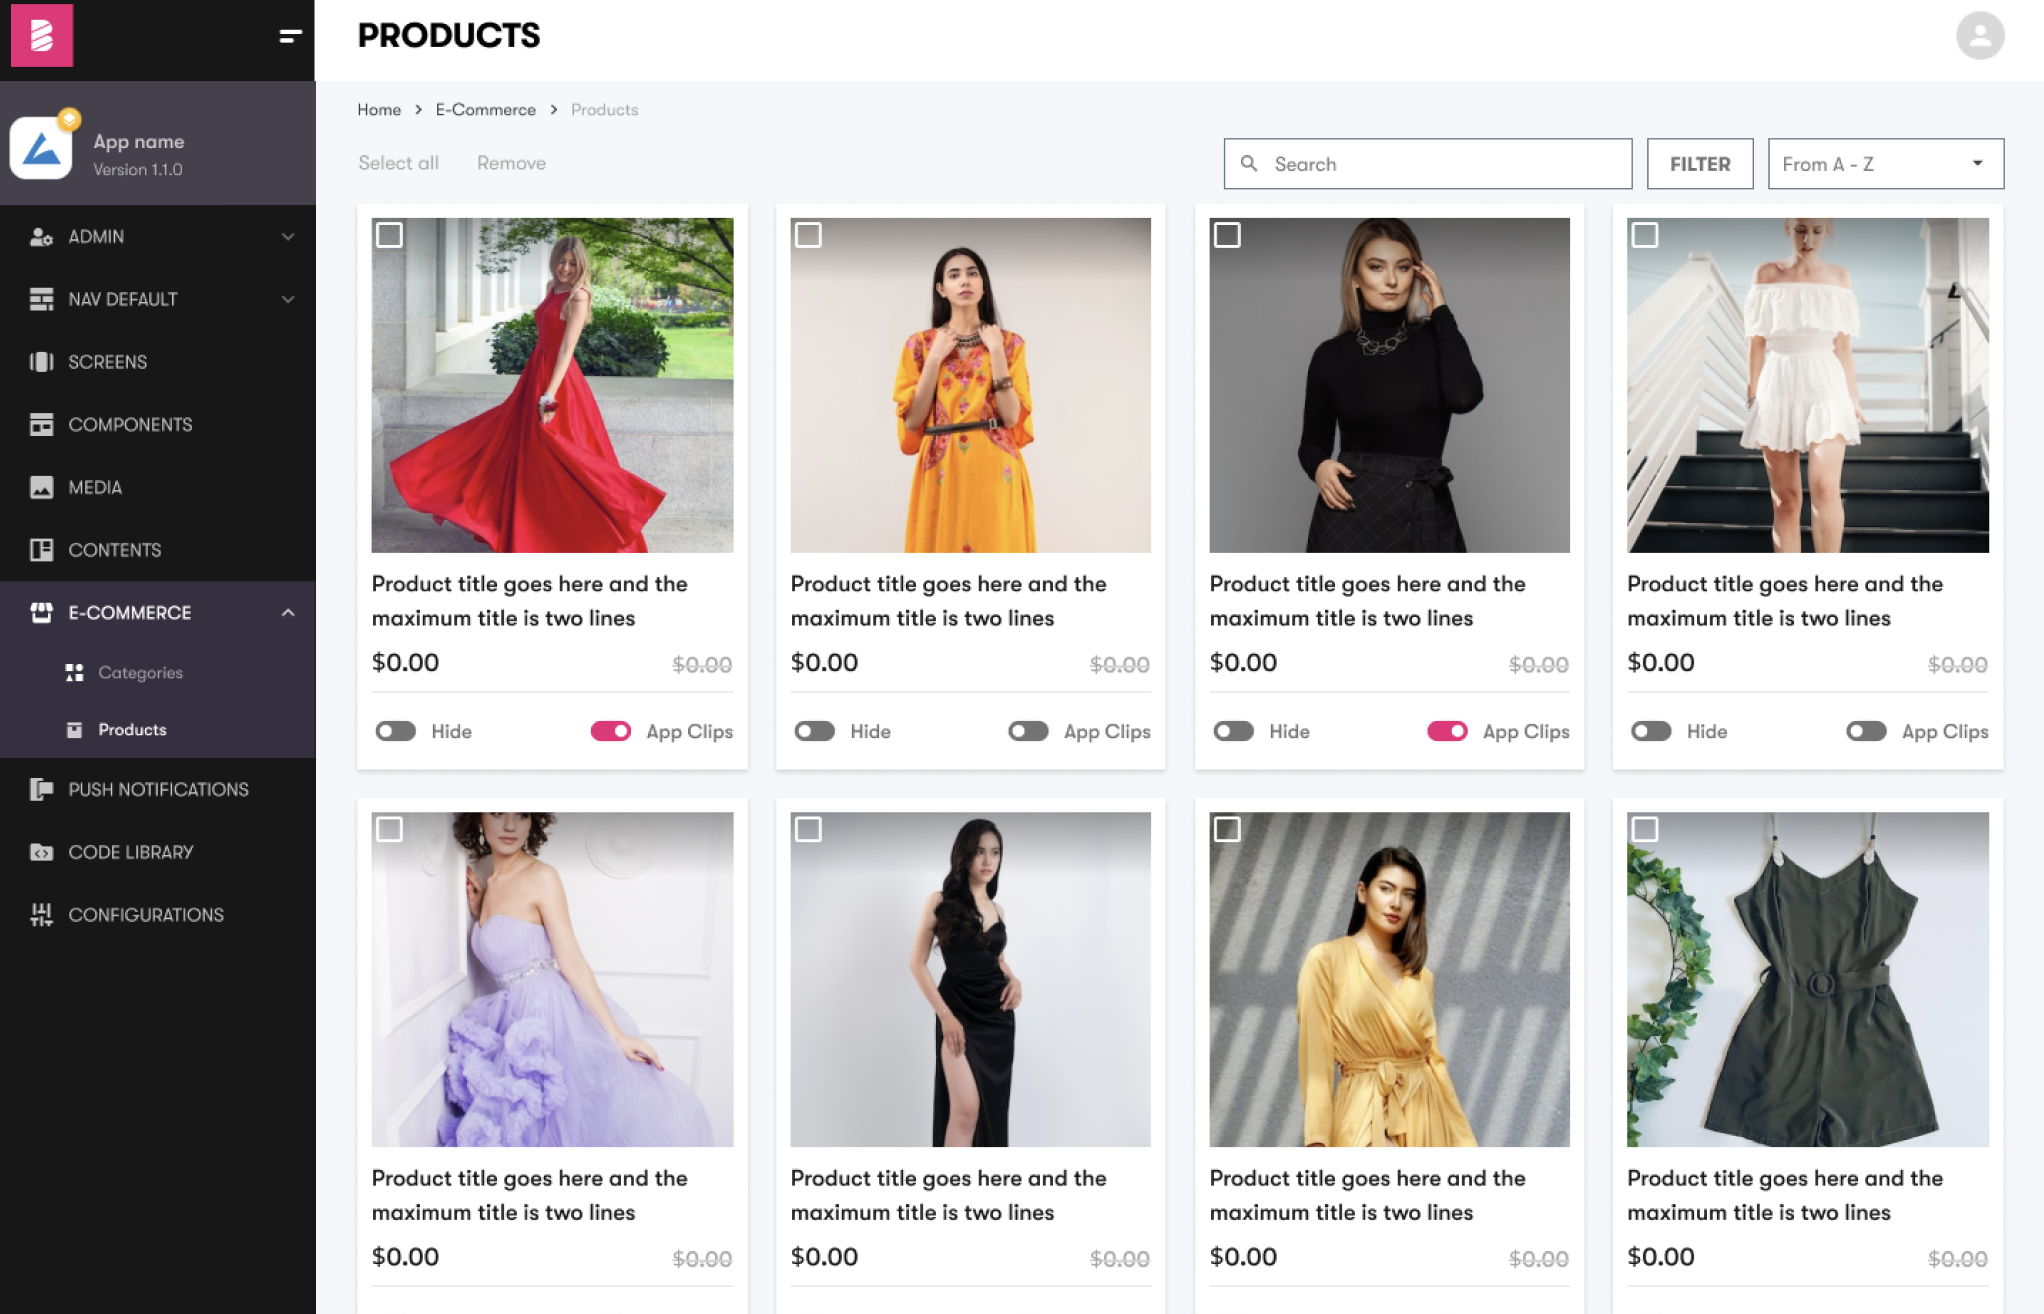 The image is a screenshot of a content management system (CMS) interface for an e-commerce application, showcasing a selection of women's fashion products.  The left side of the screen has a sidebar menu with various management options such as 'ADMIN', 'NAV DEFAULT', 'SCREENS', 'COMPONENTS', 'MEDIA', 'CONTENTS', 'E-COMMERCE', 'PUSH NOTIFICATIONS', 'CODE LIBRARY', and 'CONFIGURATIONS'. The 'E-COMMERCE' section is expanded to reveal 'Categories' and 'Products'.  The main area of the interface, labeled 